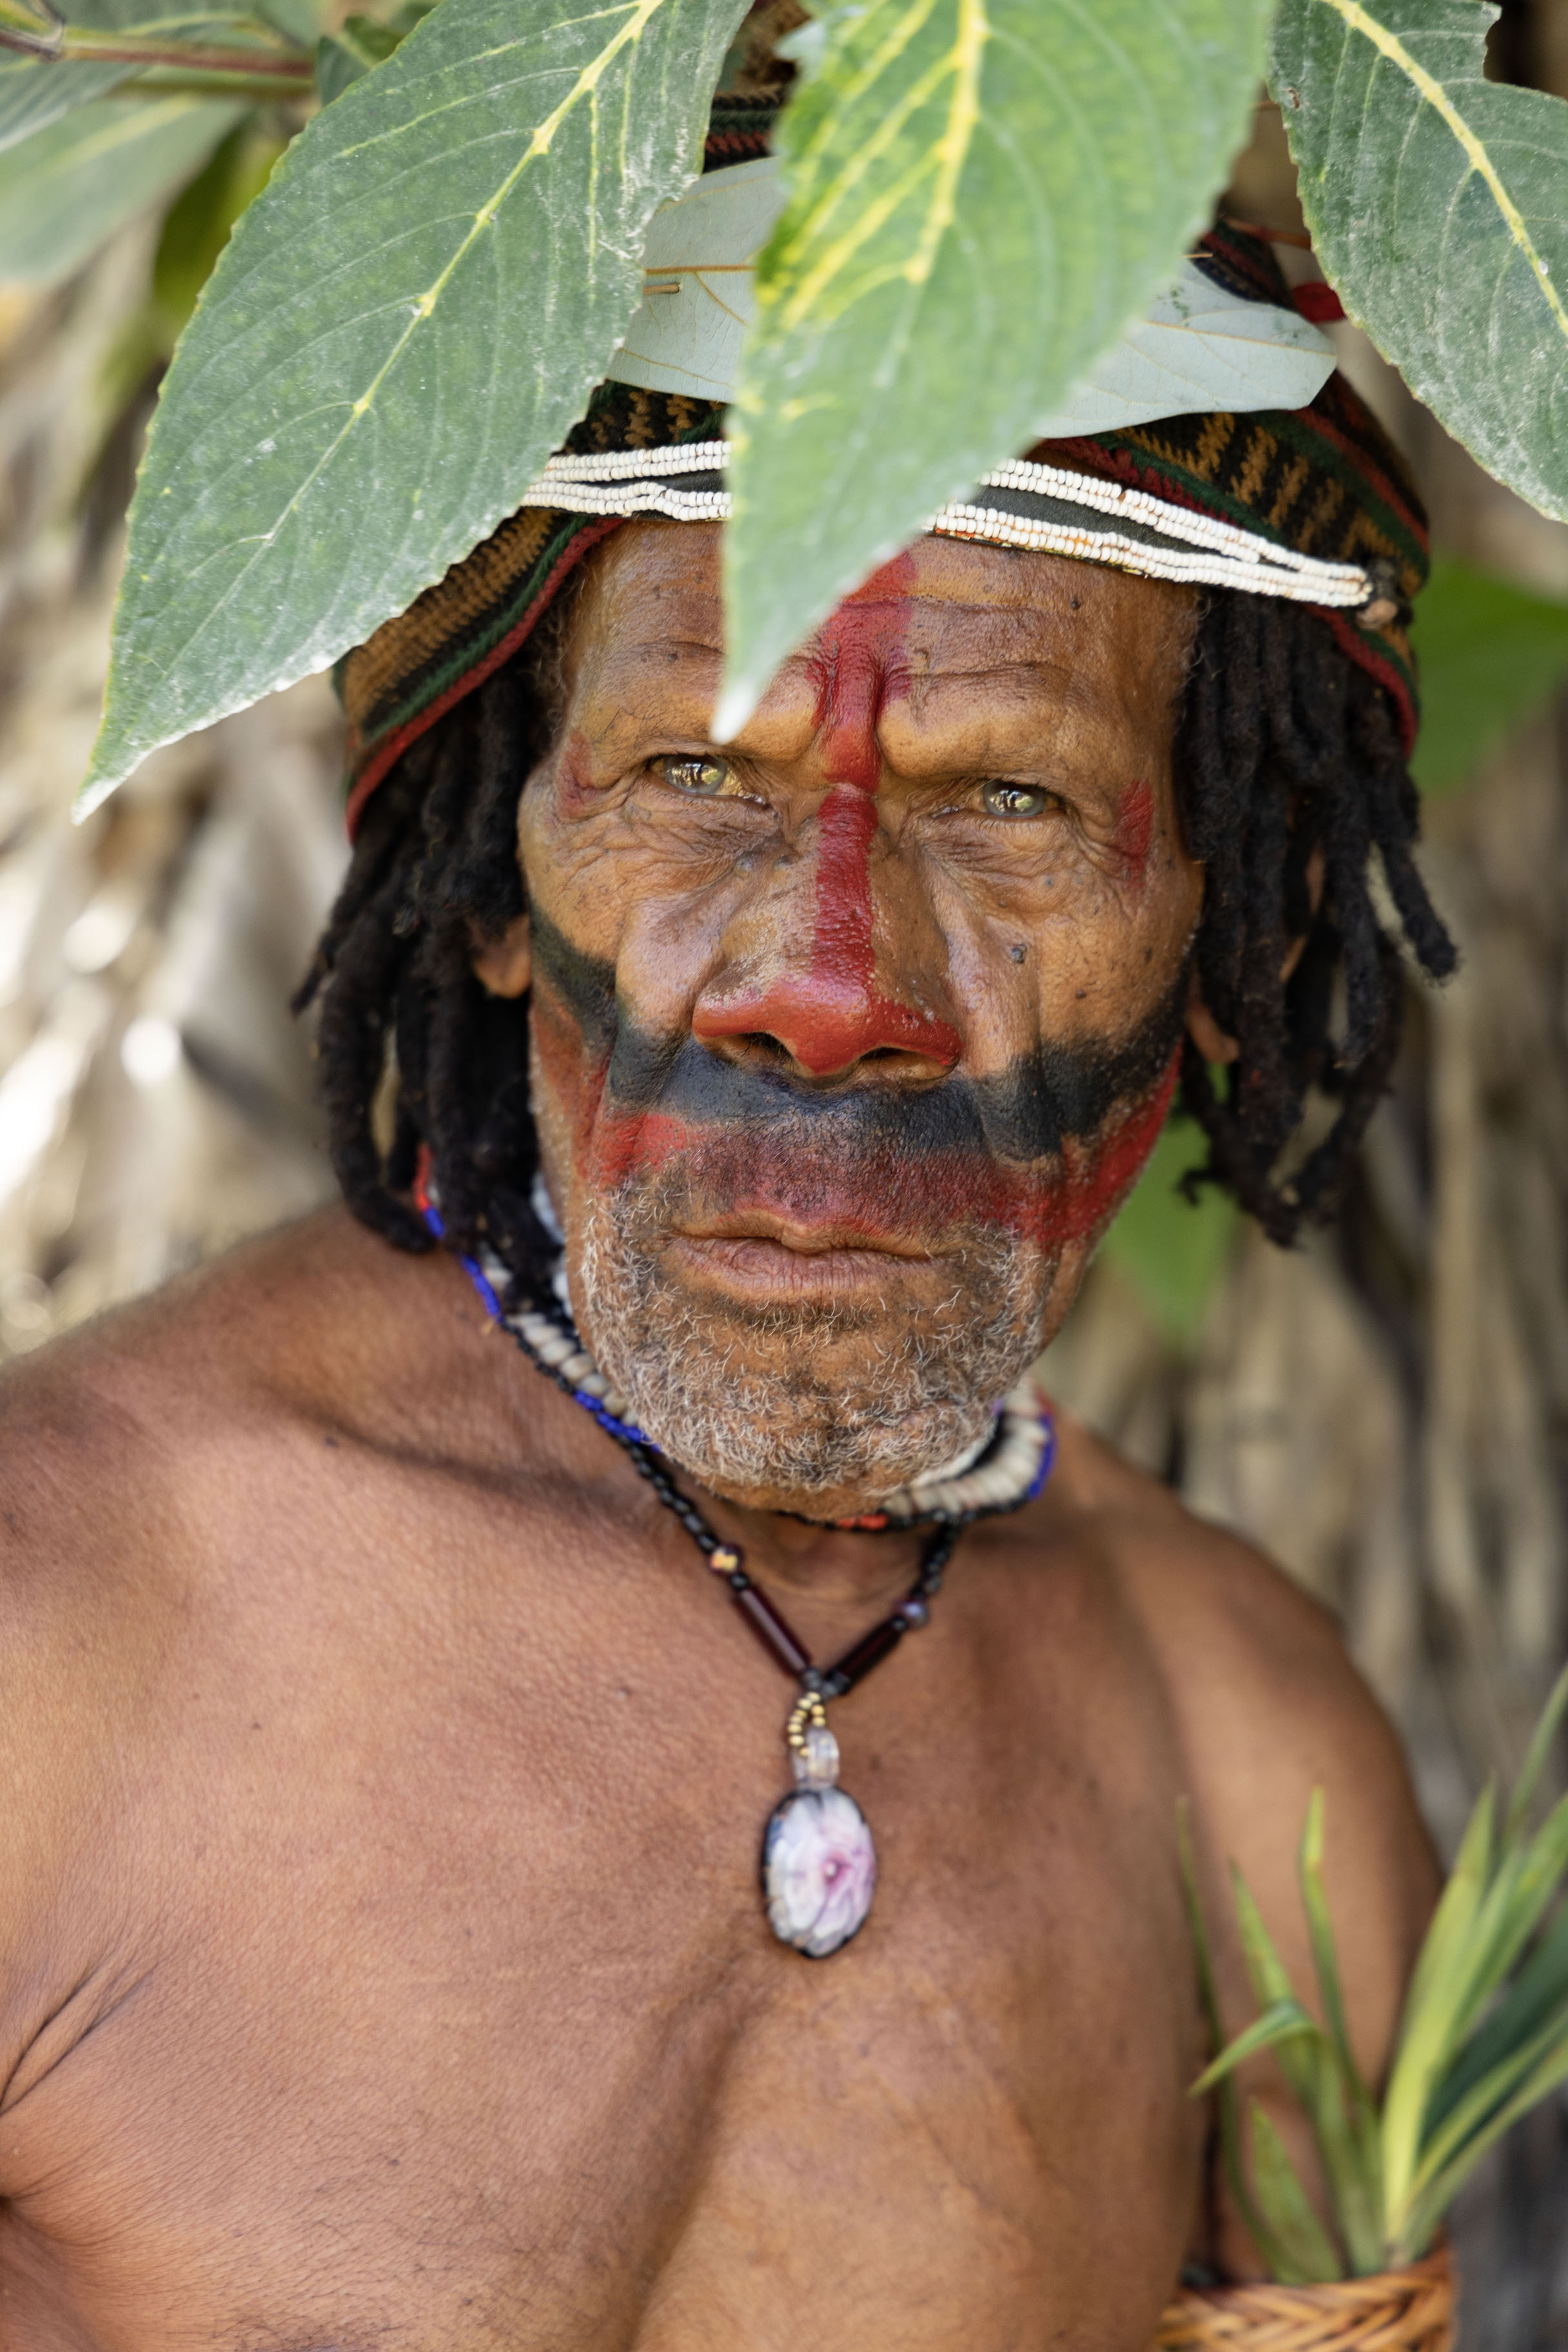 One of the Huli Wigmen with a differently painted face | Huli Wigmen | Papúa Nueva Guinea